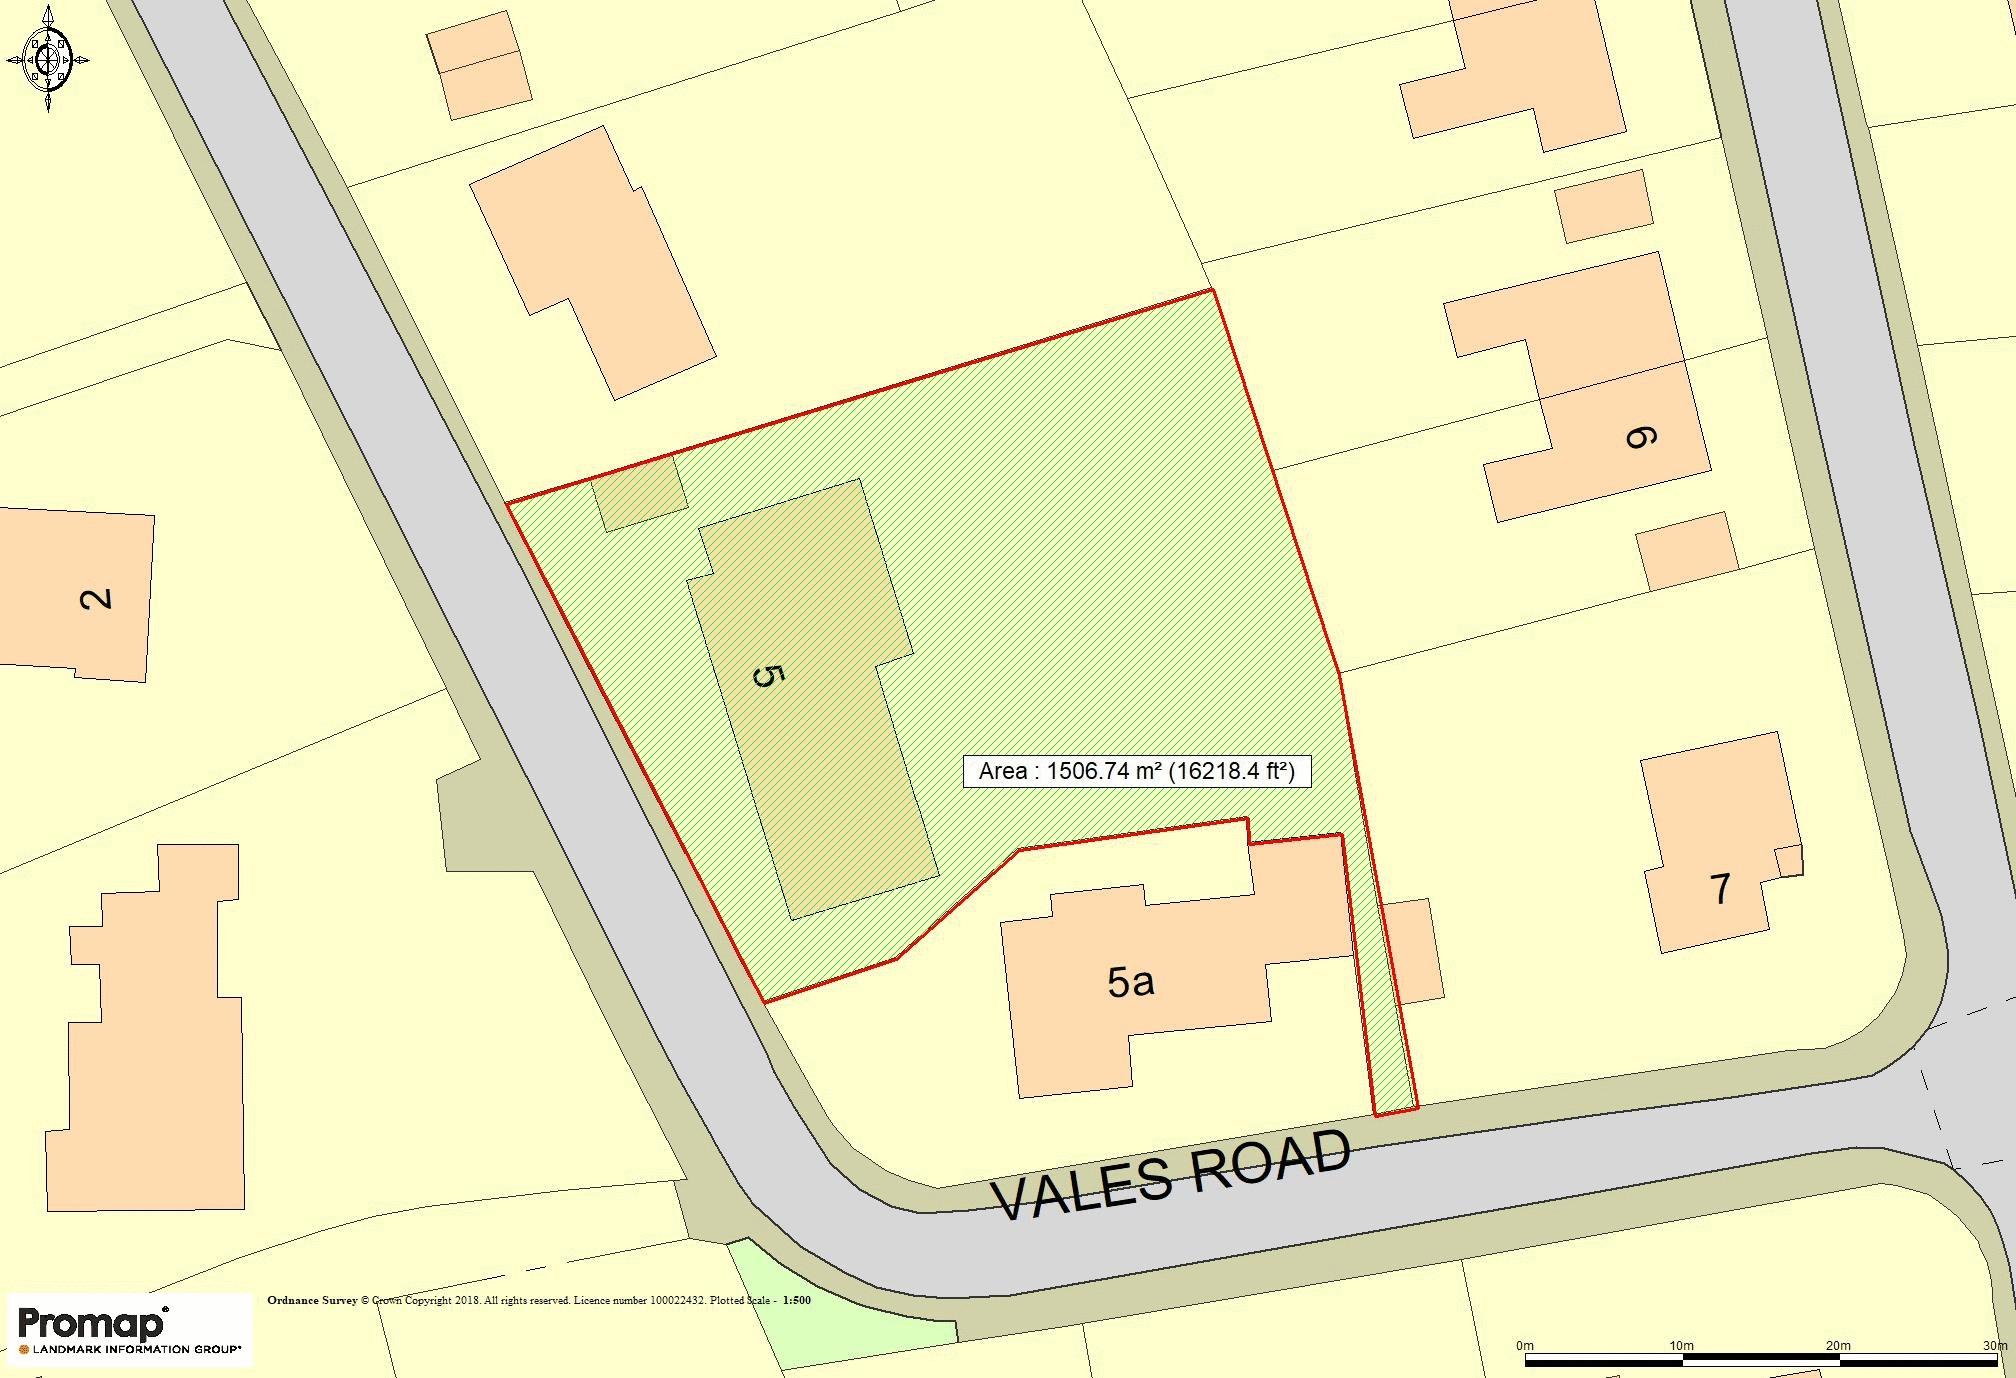 Approximate Site Plan